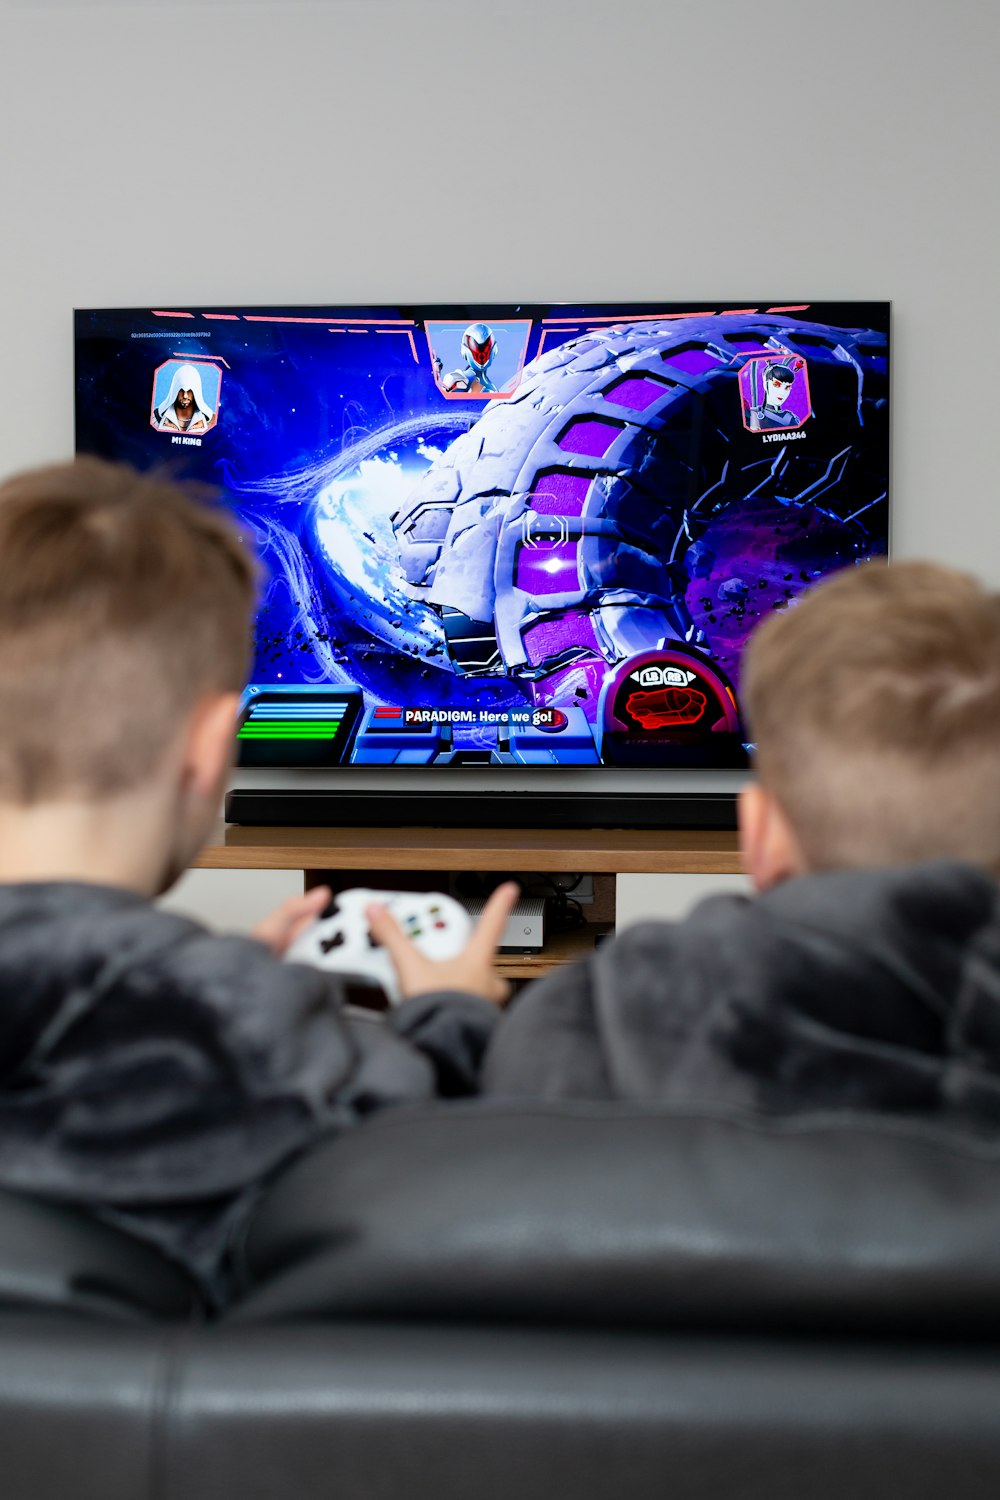 a boy is playing a video game on the television